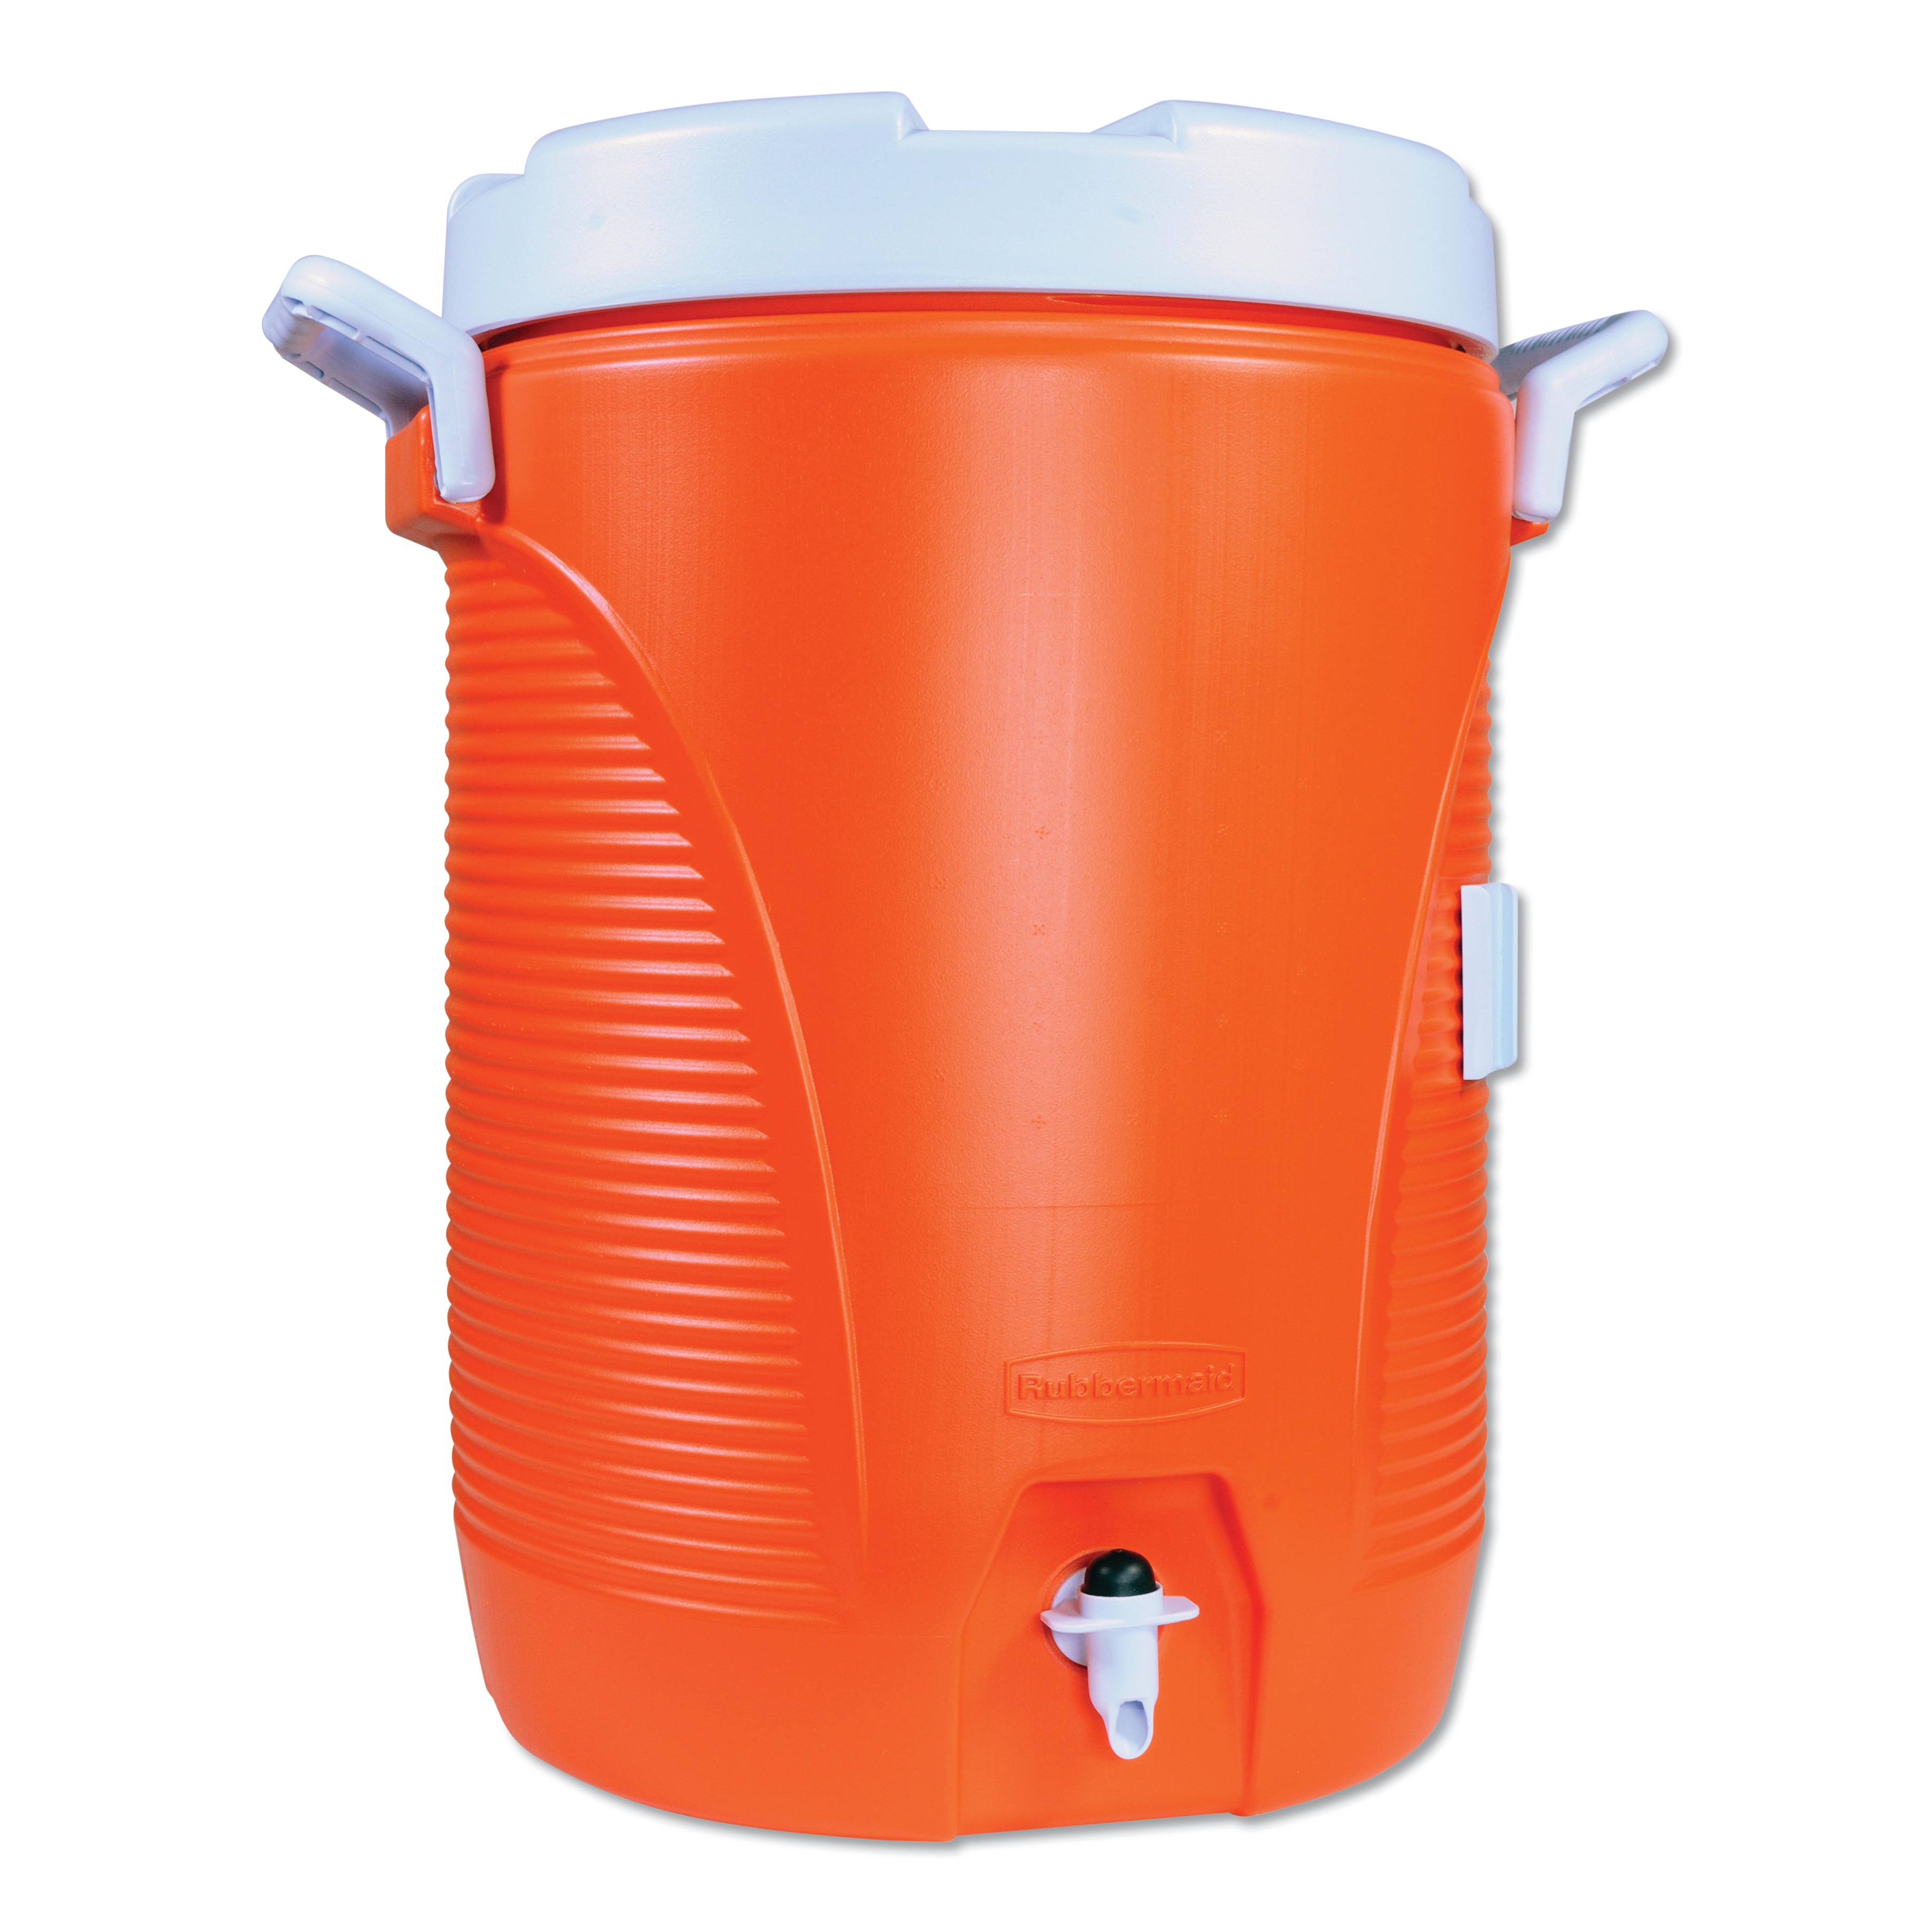  Rubbermaid Commercial 1840999 Insulated Water Cooler, 5 gal, Orange/White (RCP1840999) 